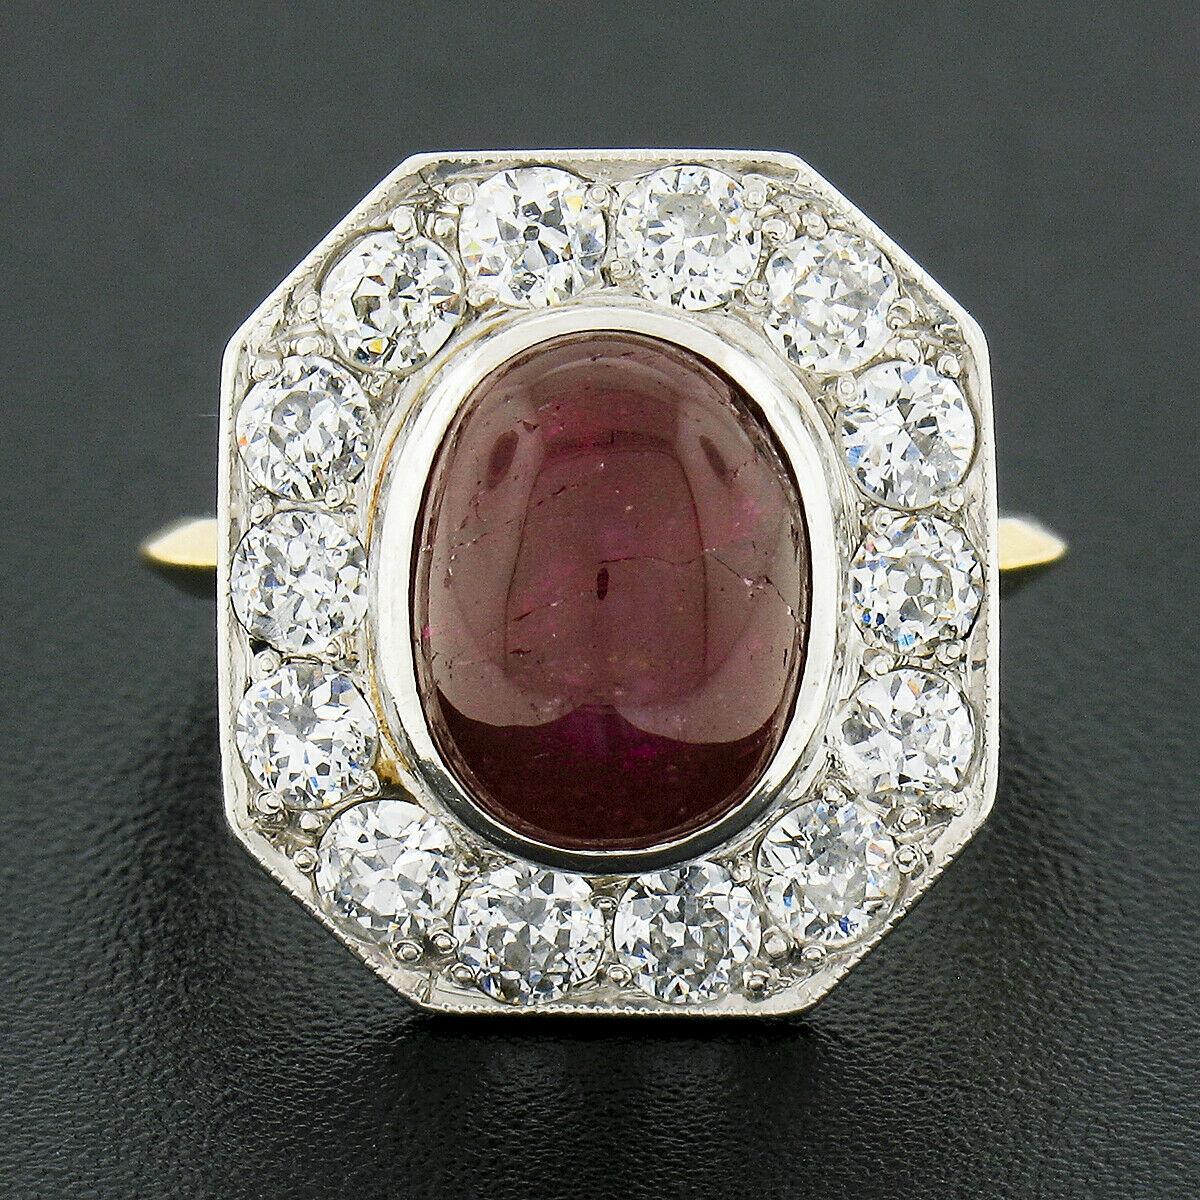 You are looking at an absolutely gorgeous antique cocktail ring that was crafted during the 1910's from solid 18k yellow gold with a platinum top. The ring features an oval cabochon cut ruby at its center, in which is neatly bezel set displaying a